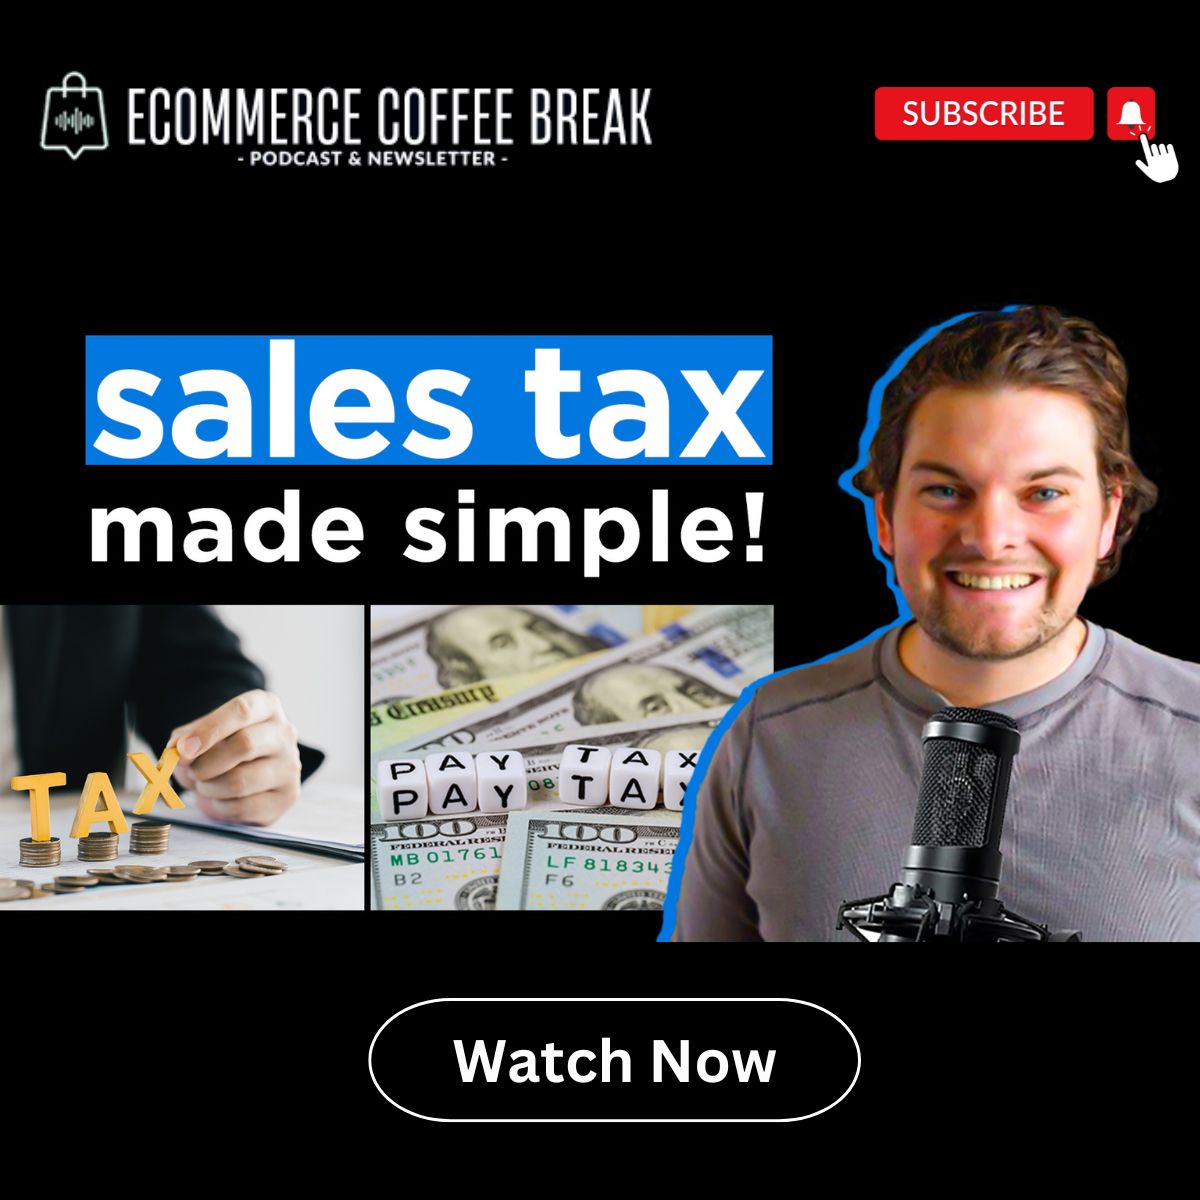 How to Avoid a Tax Audit DISASTER. Sales #TaxCompliance Made Easy!

🎙We discuss how to ensure your business is sales tax compliant, with Matthew Campbell, co-founder at breezyfile.com.

Tune in: t.ly/16h1B

#SmallBizAdvice #TaxHelp #AccountingTips #SalesTax